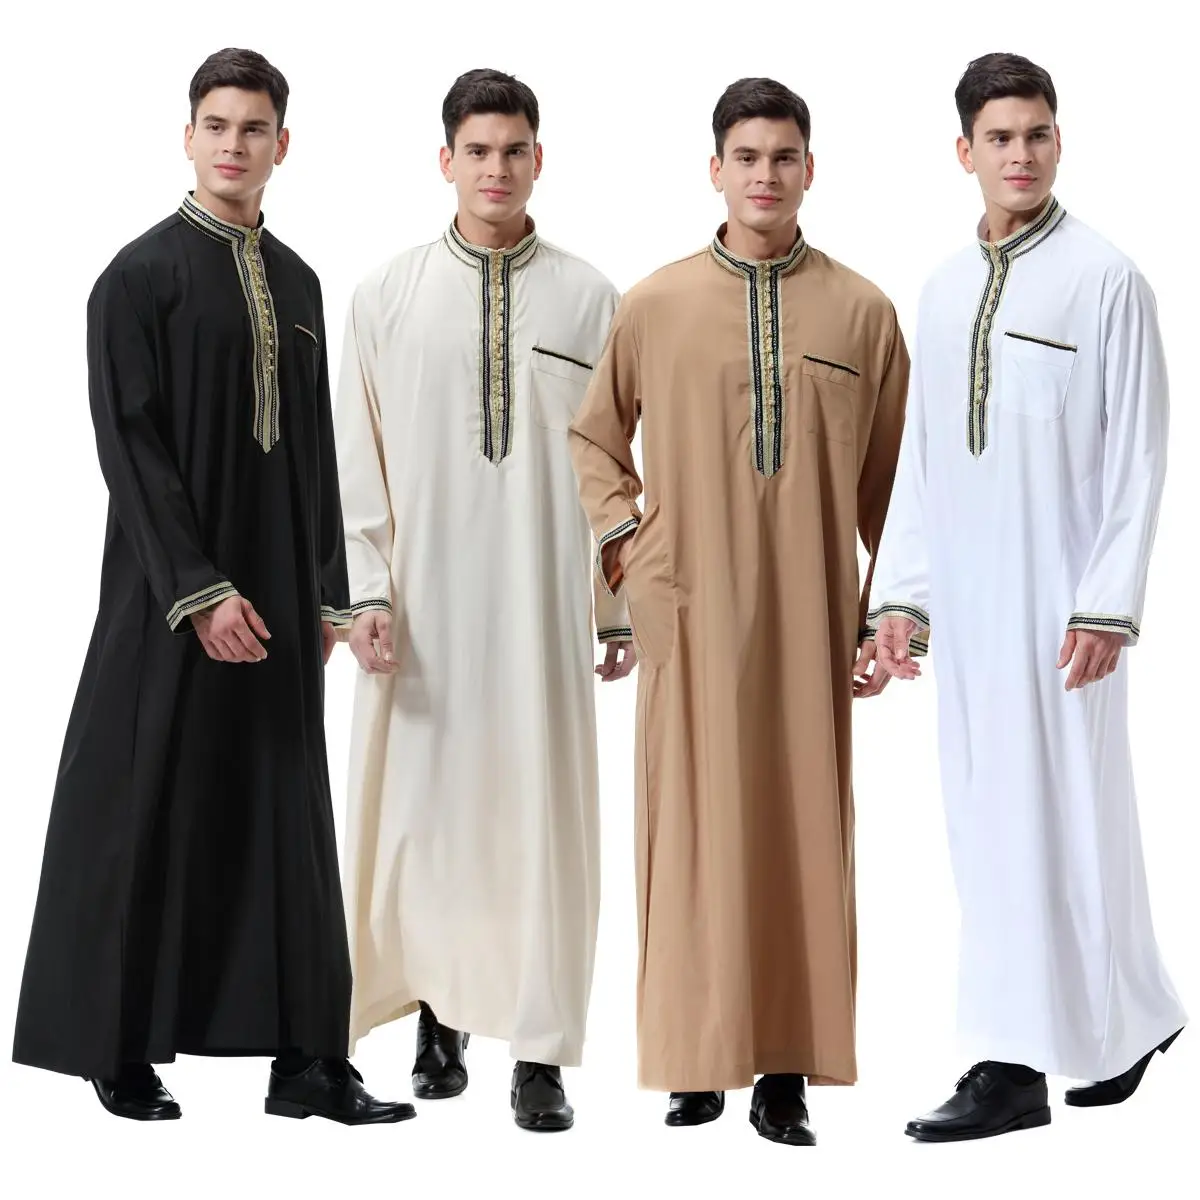 JXAA Men Dressing Gown,Casual Loose Ethnic Kaftan Robes Arab Muslim Shirt Middle East Cotton Dressing Gown